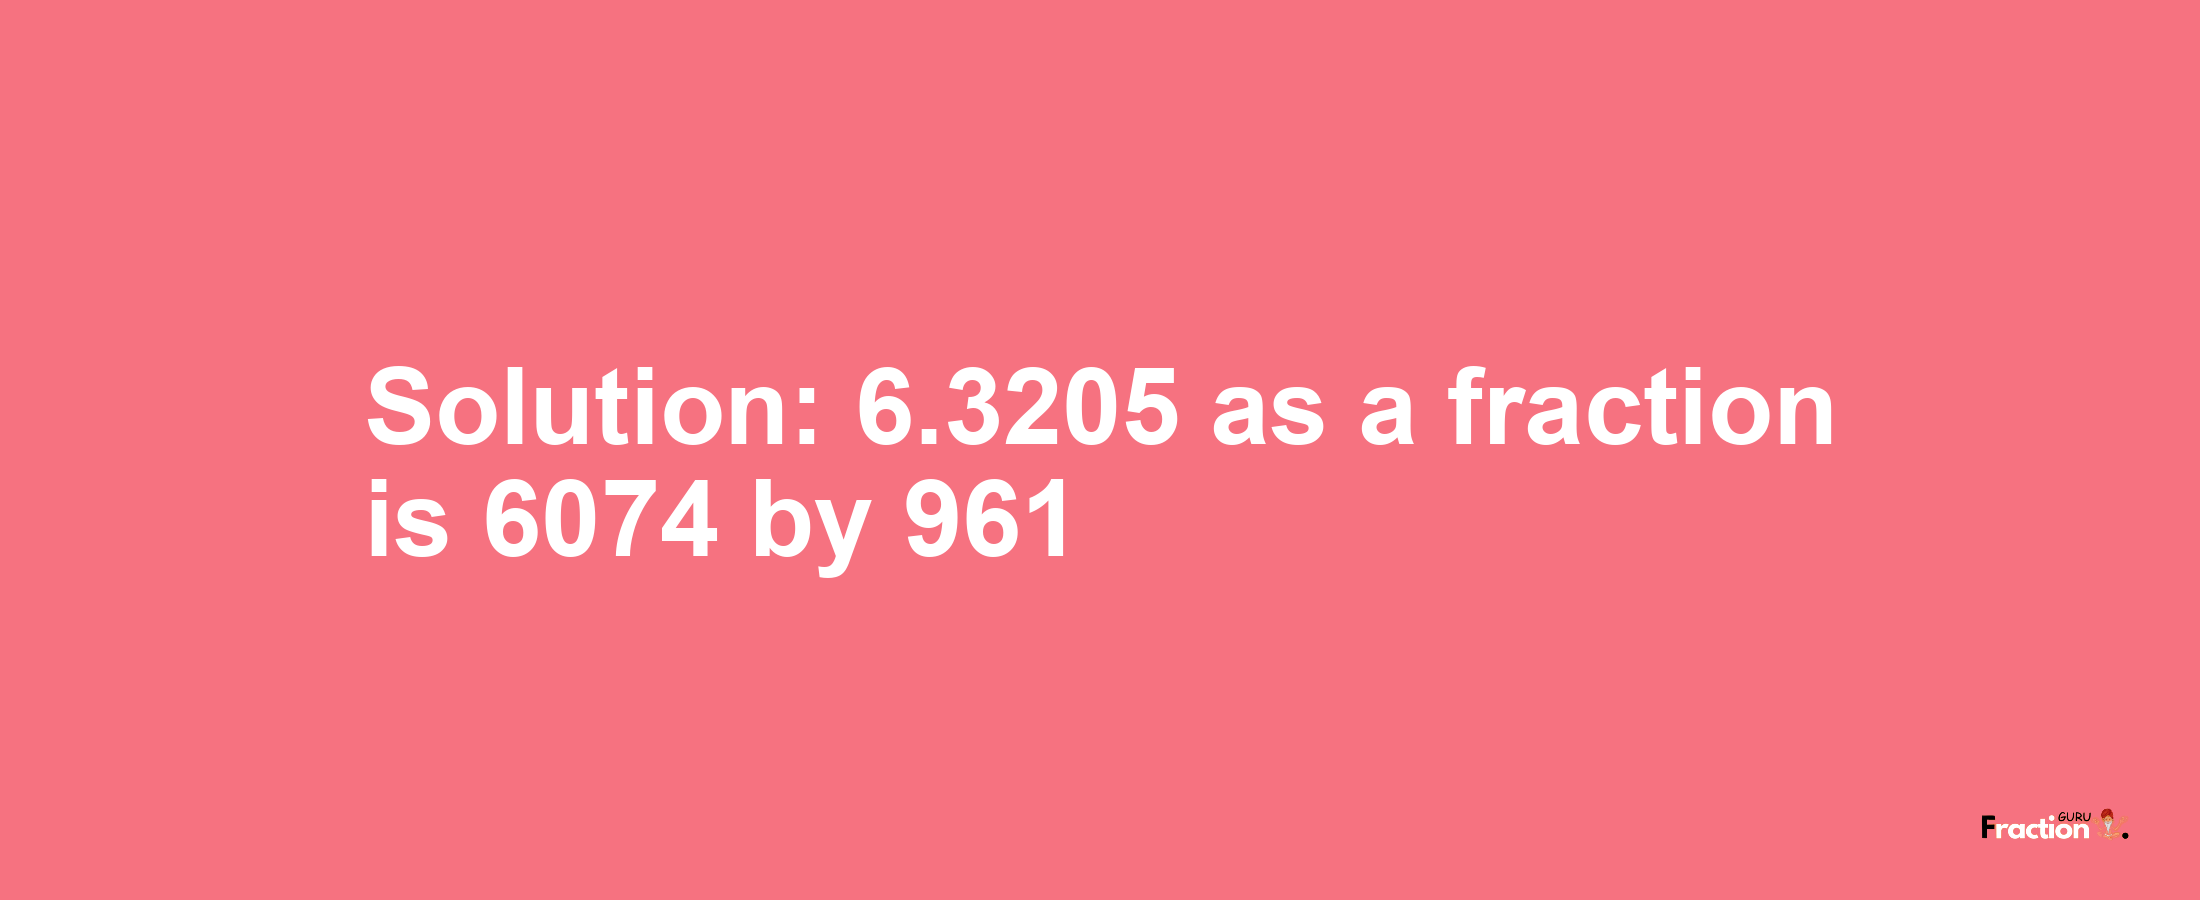 Solution:6.3205 as a fraction is 6074/961